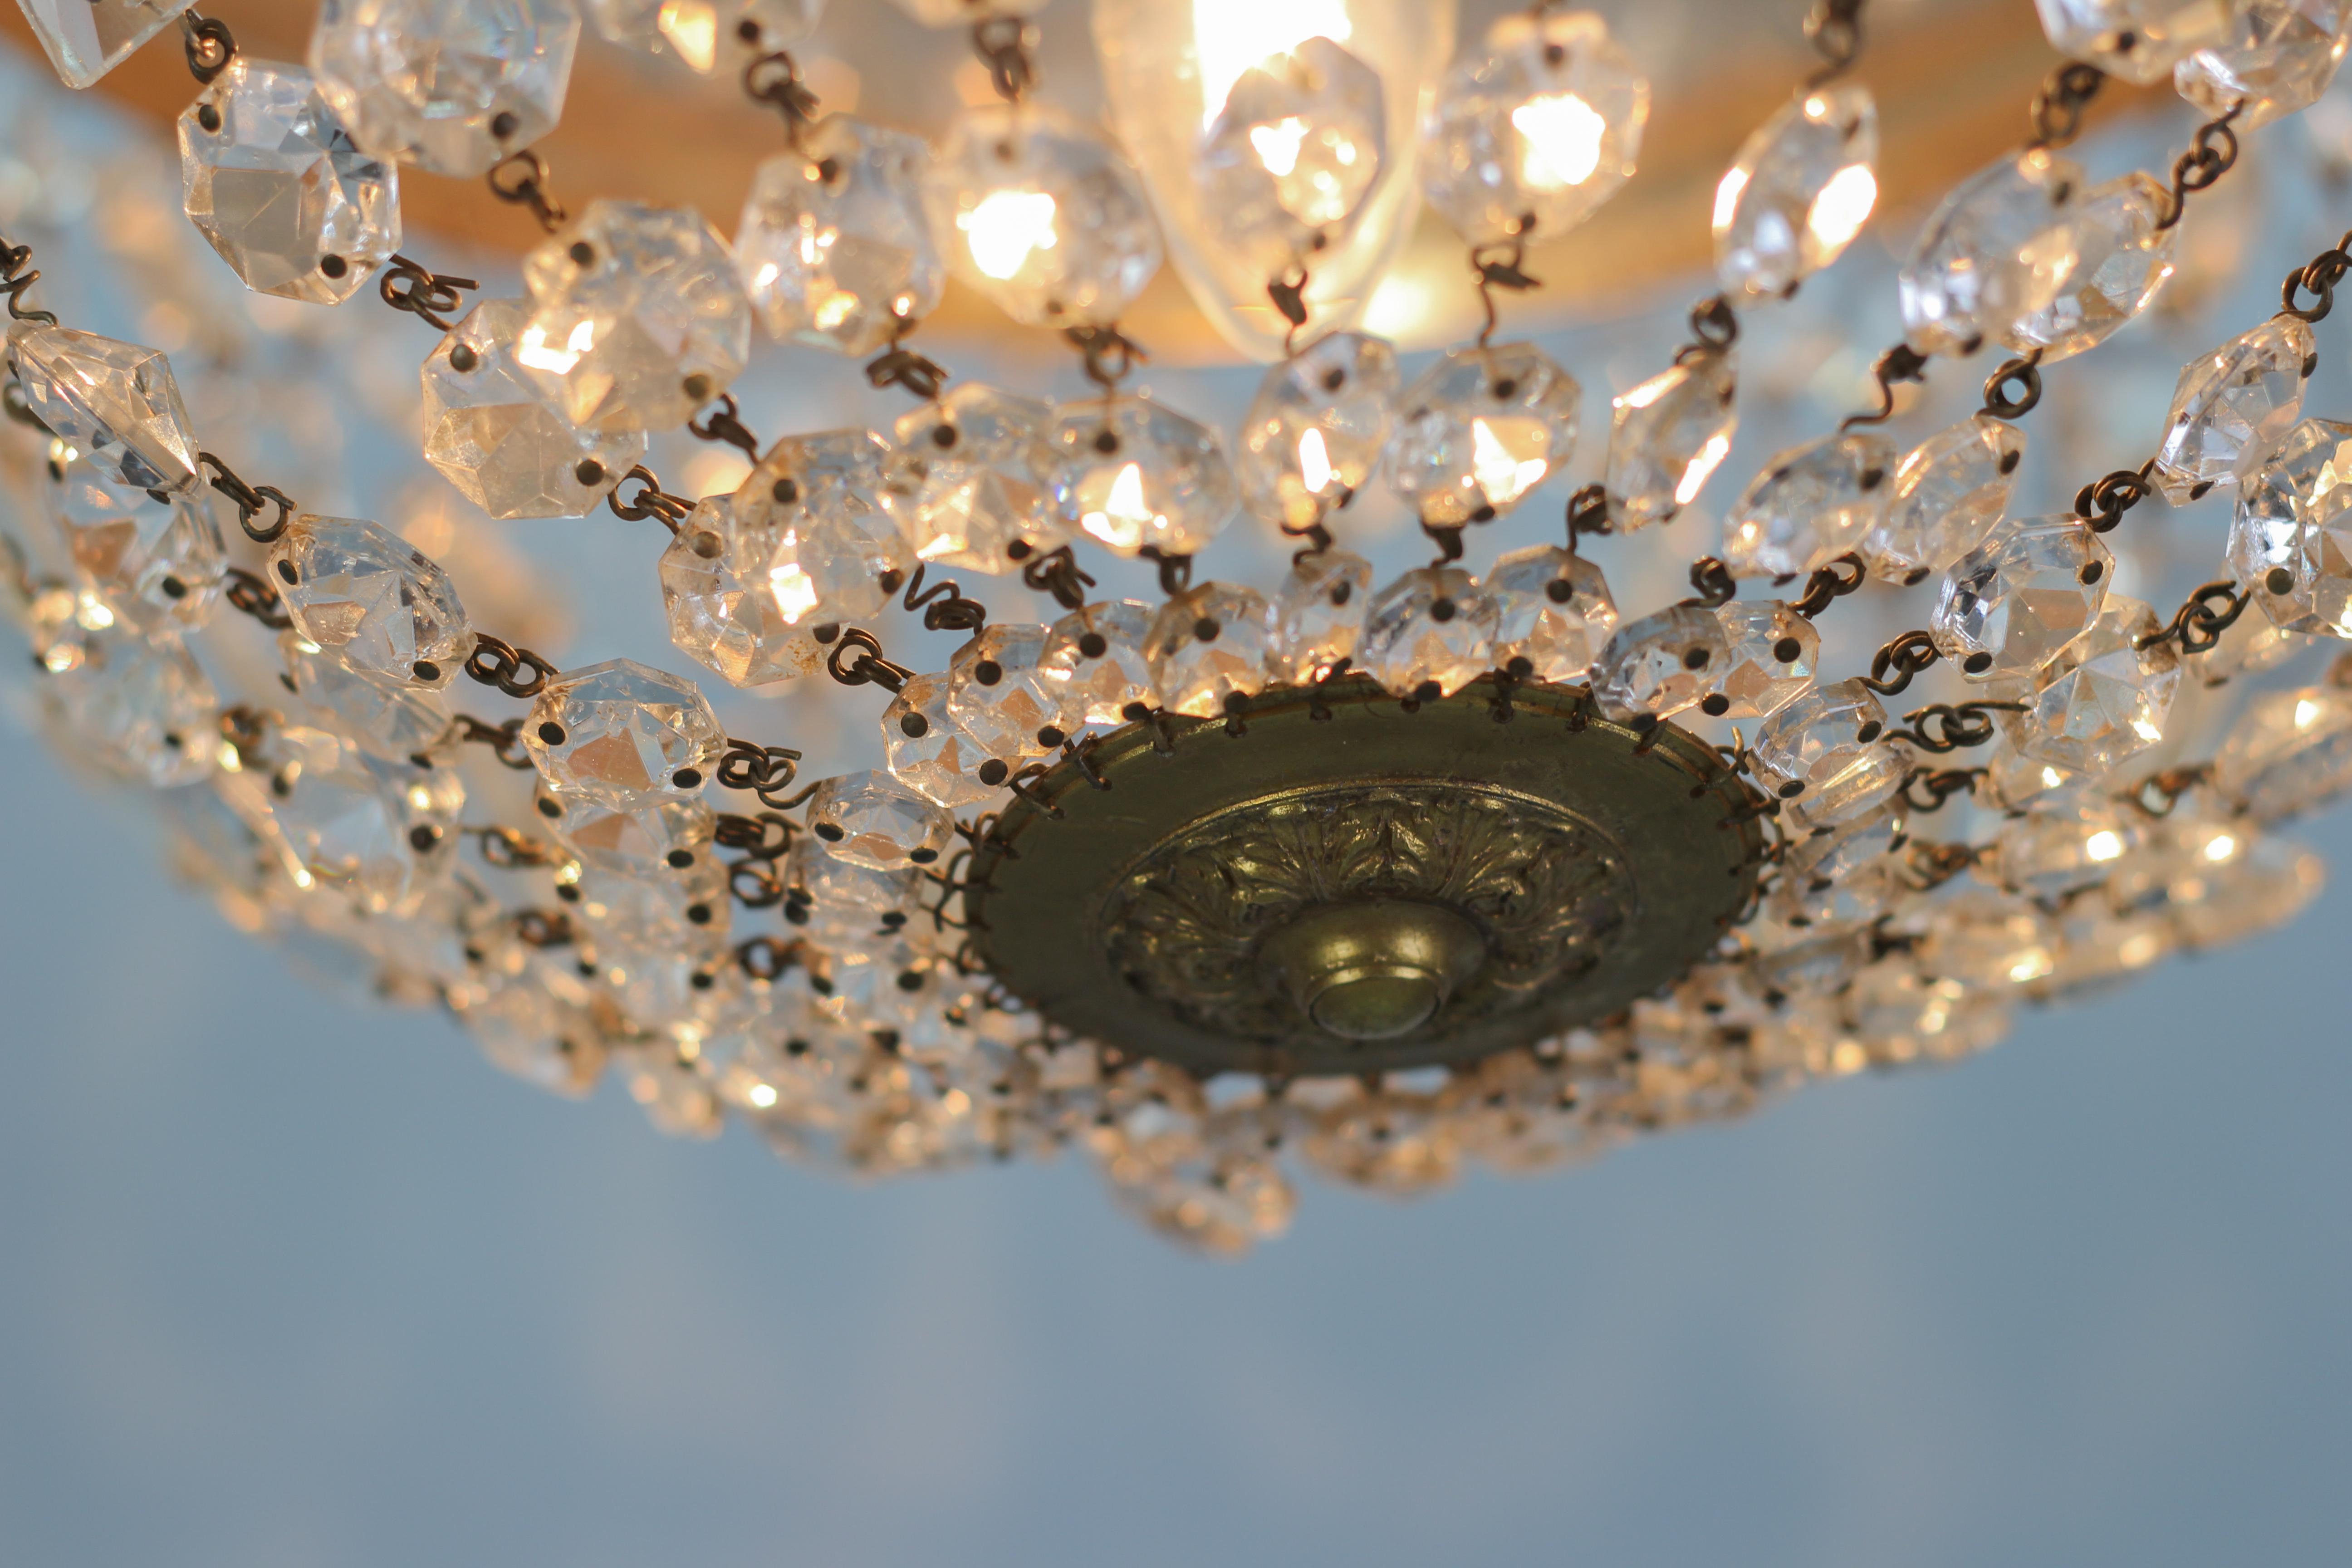 Mid-20th Century French Art Deco Style Crystal Glass and Brass Basket Ceiling Light Fixture